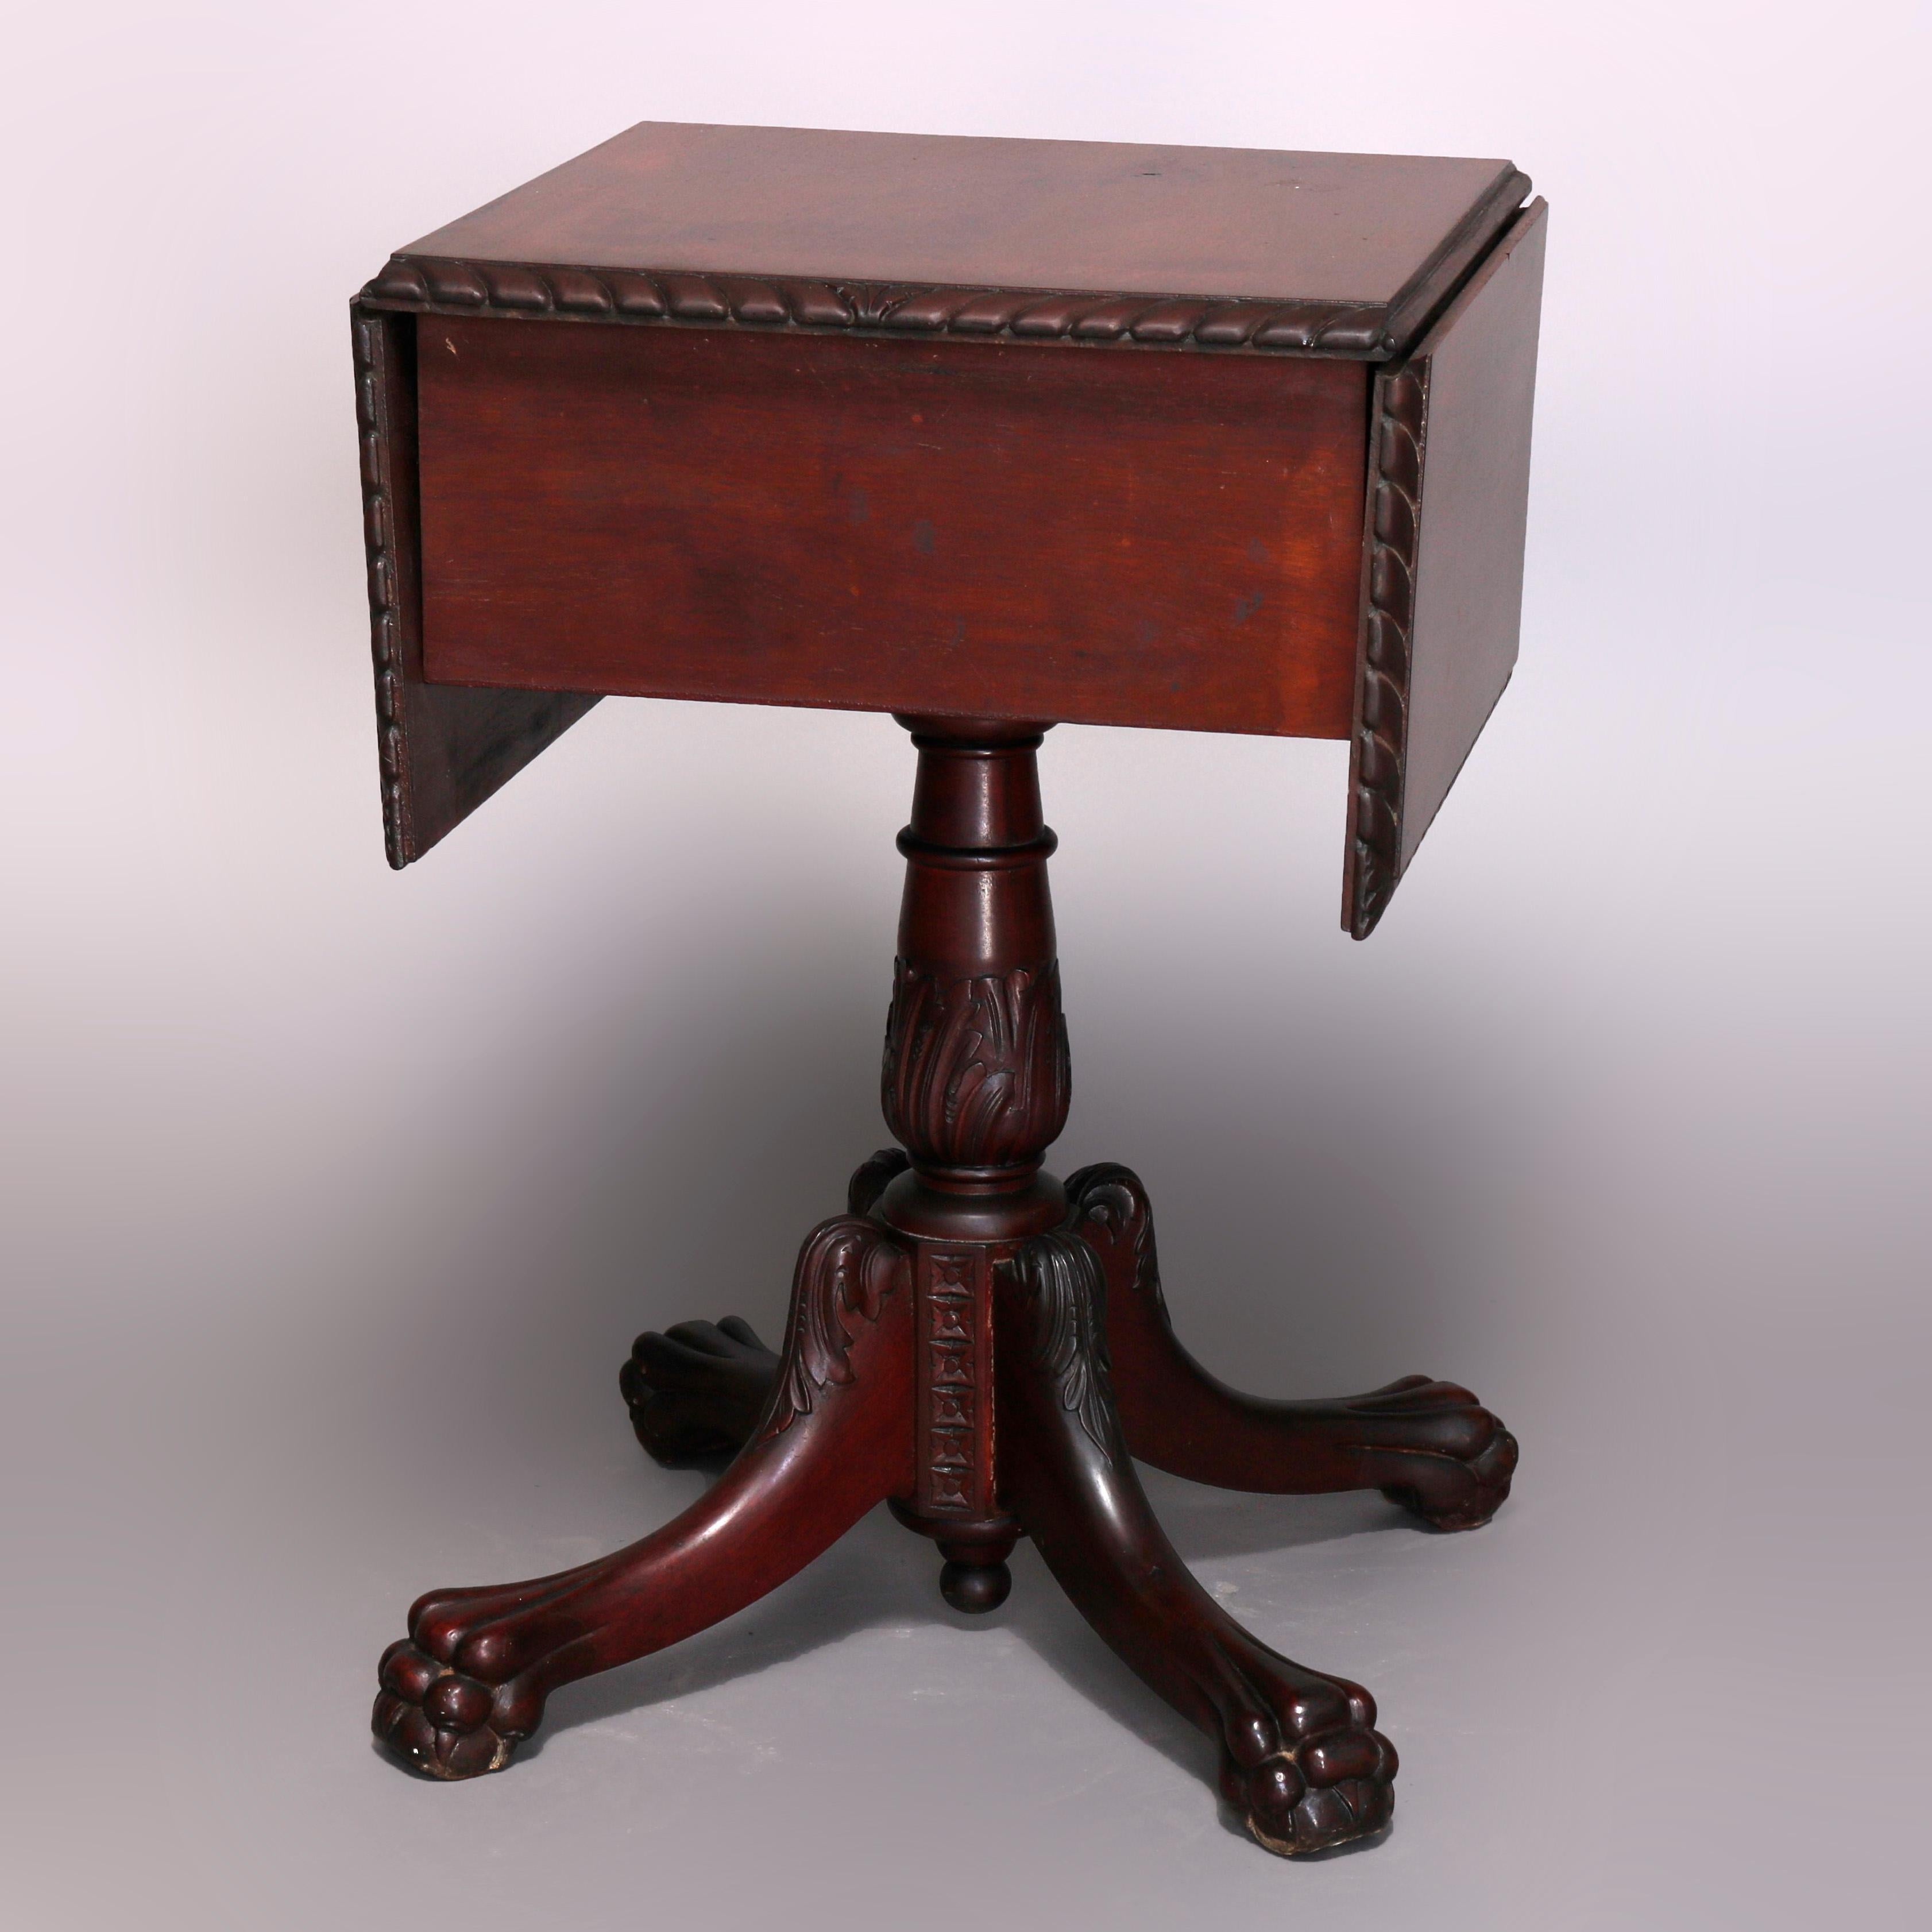 Antique Classical American Empire Flame Mahogany Drop Leaf Stand, 19th Century 1